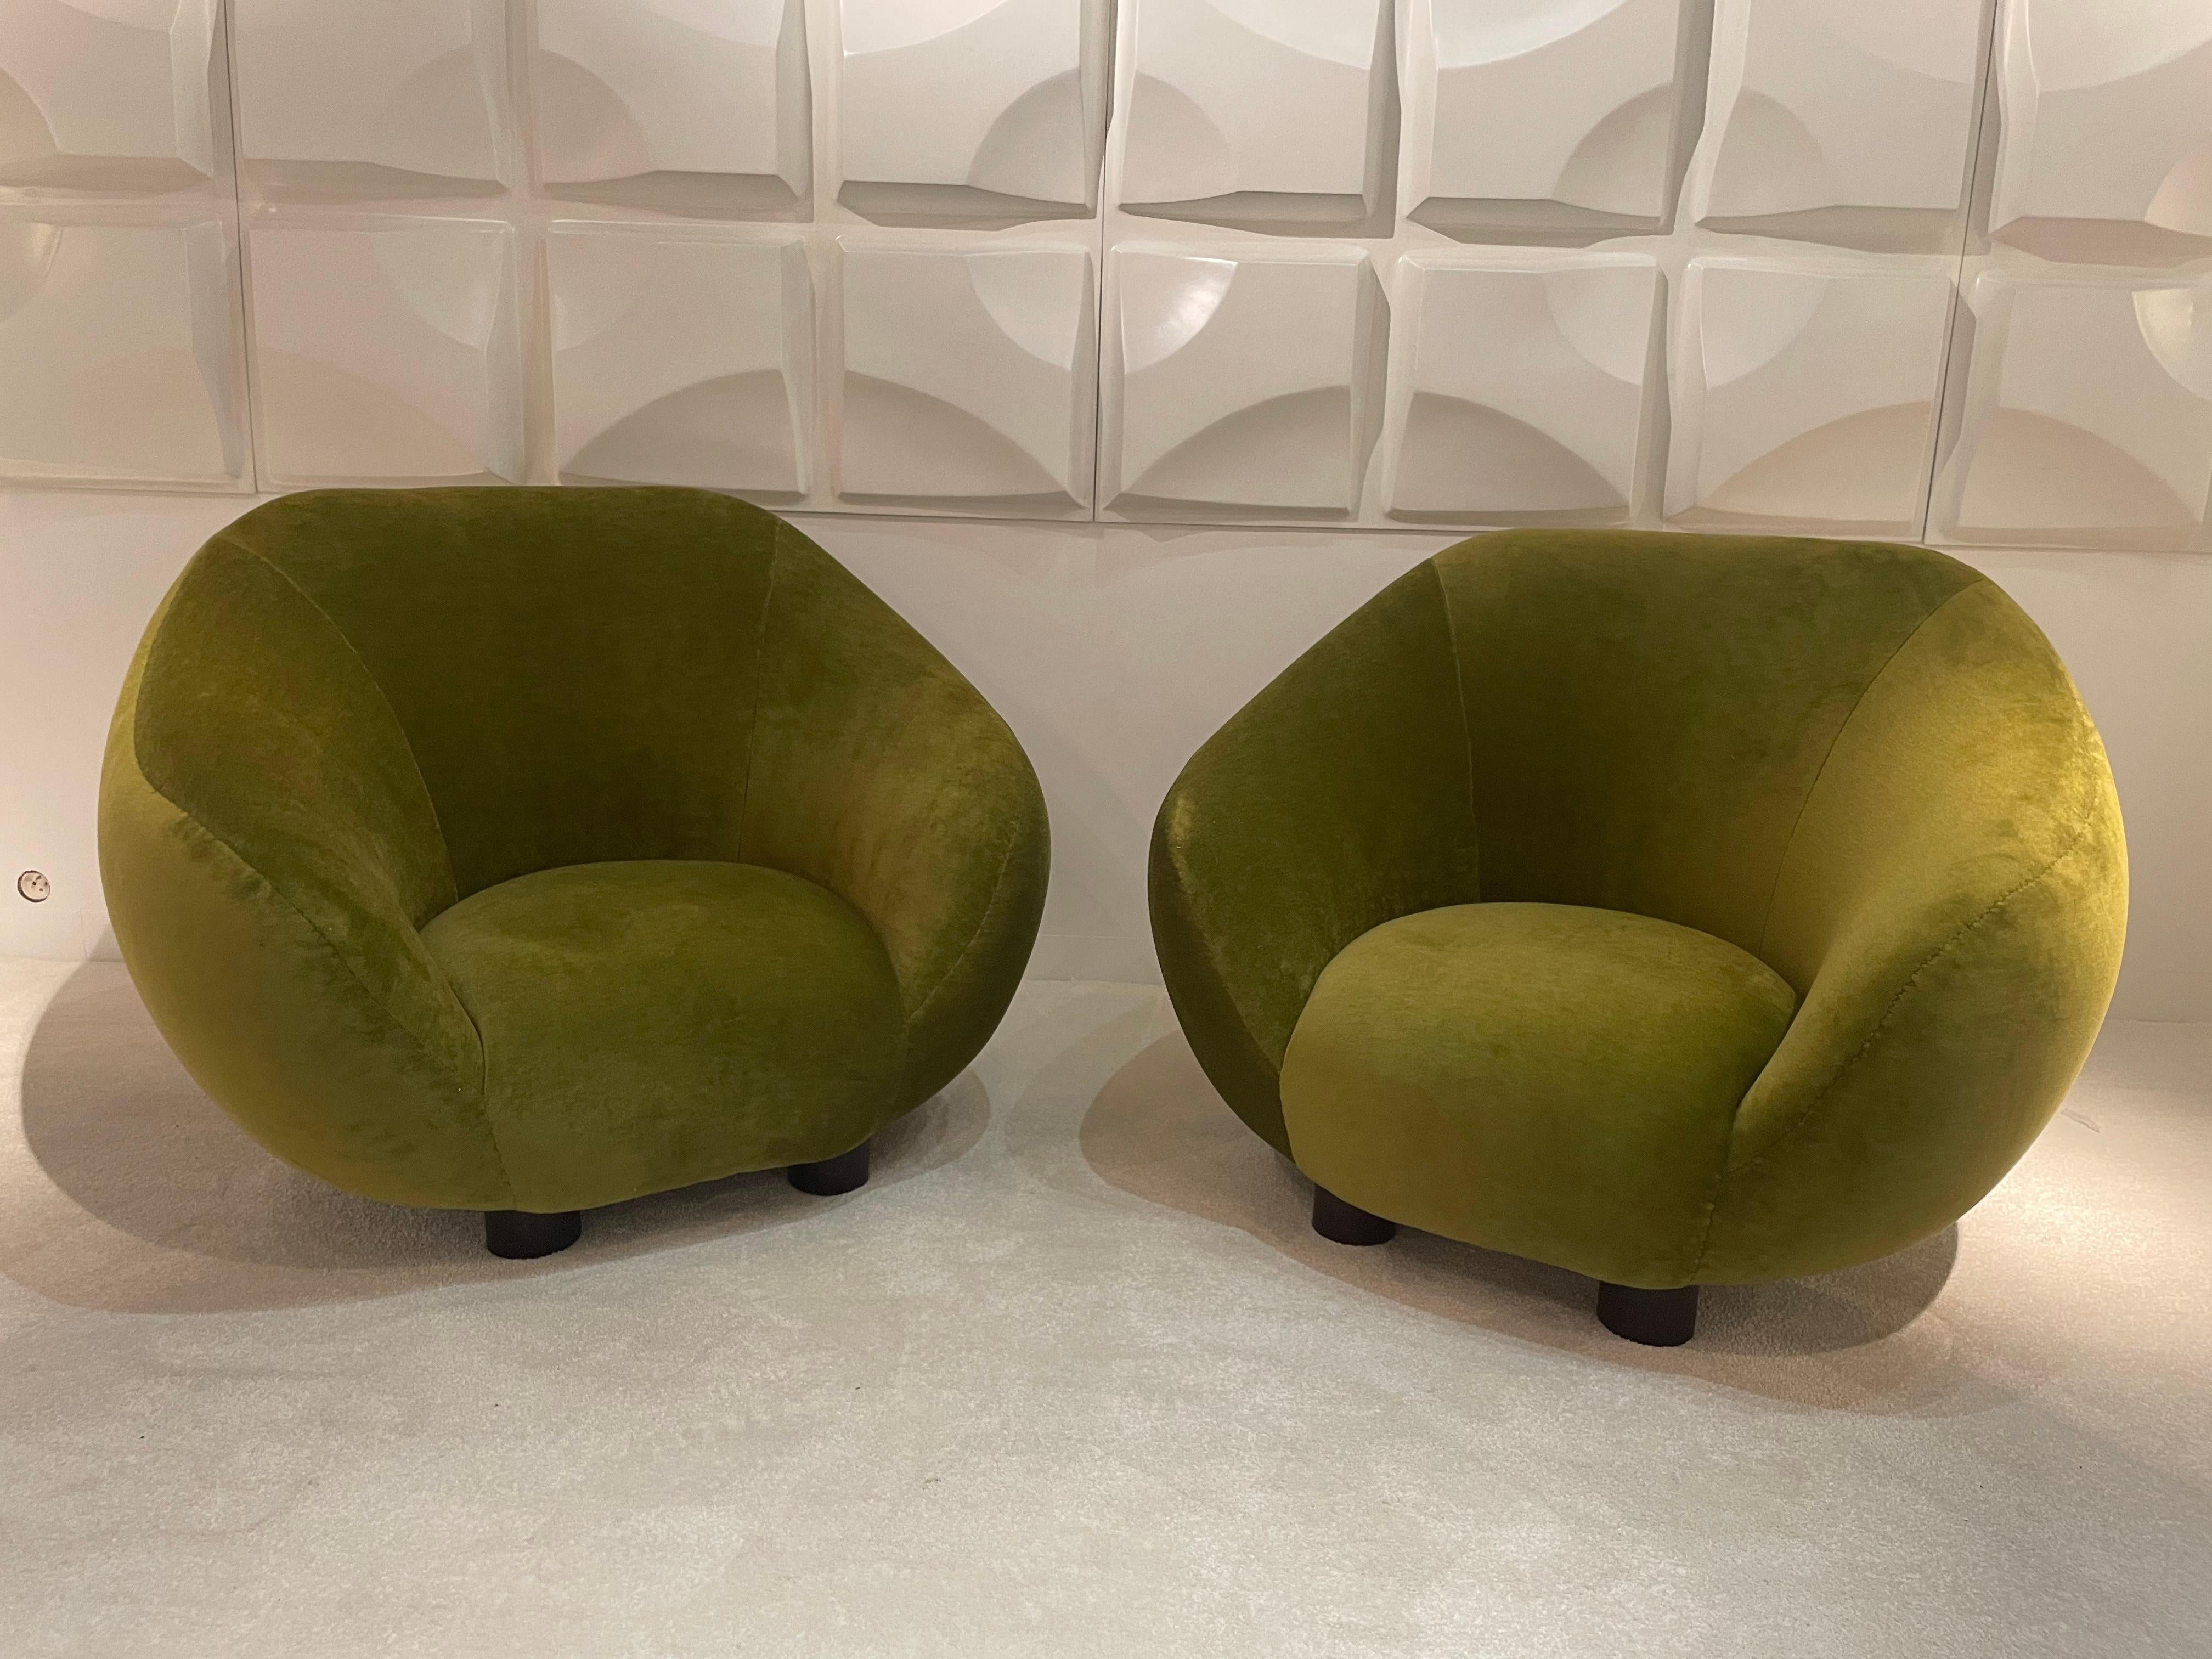 Pair of armchairs by Frederico Munari from 1970
In velvet.